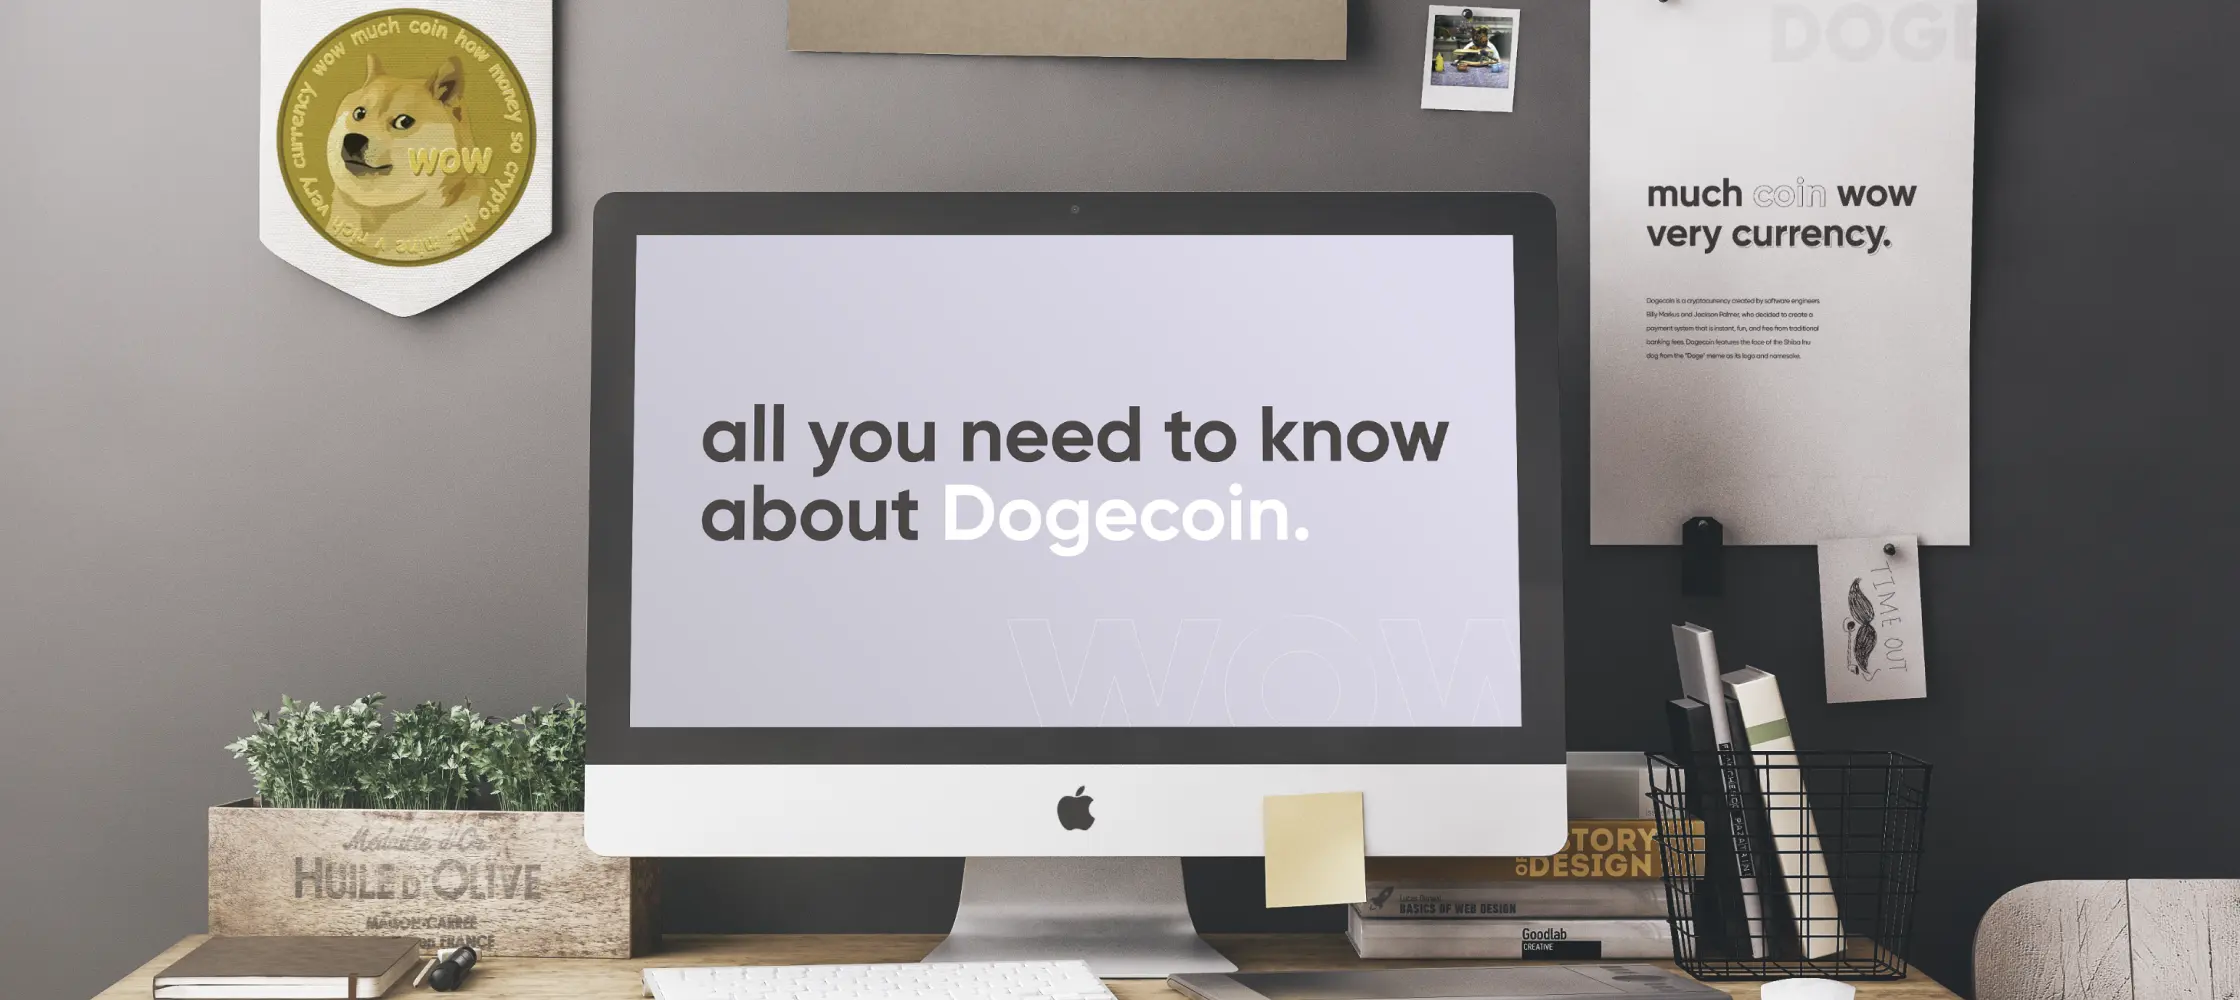 All you need to know about Dogecoin